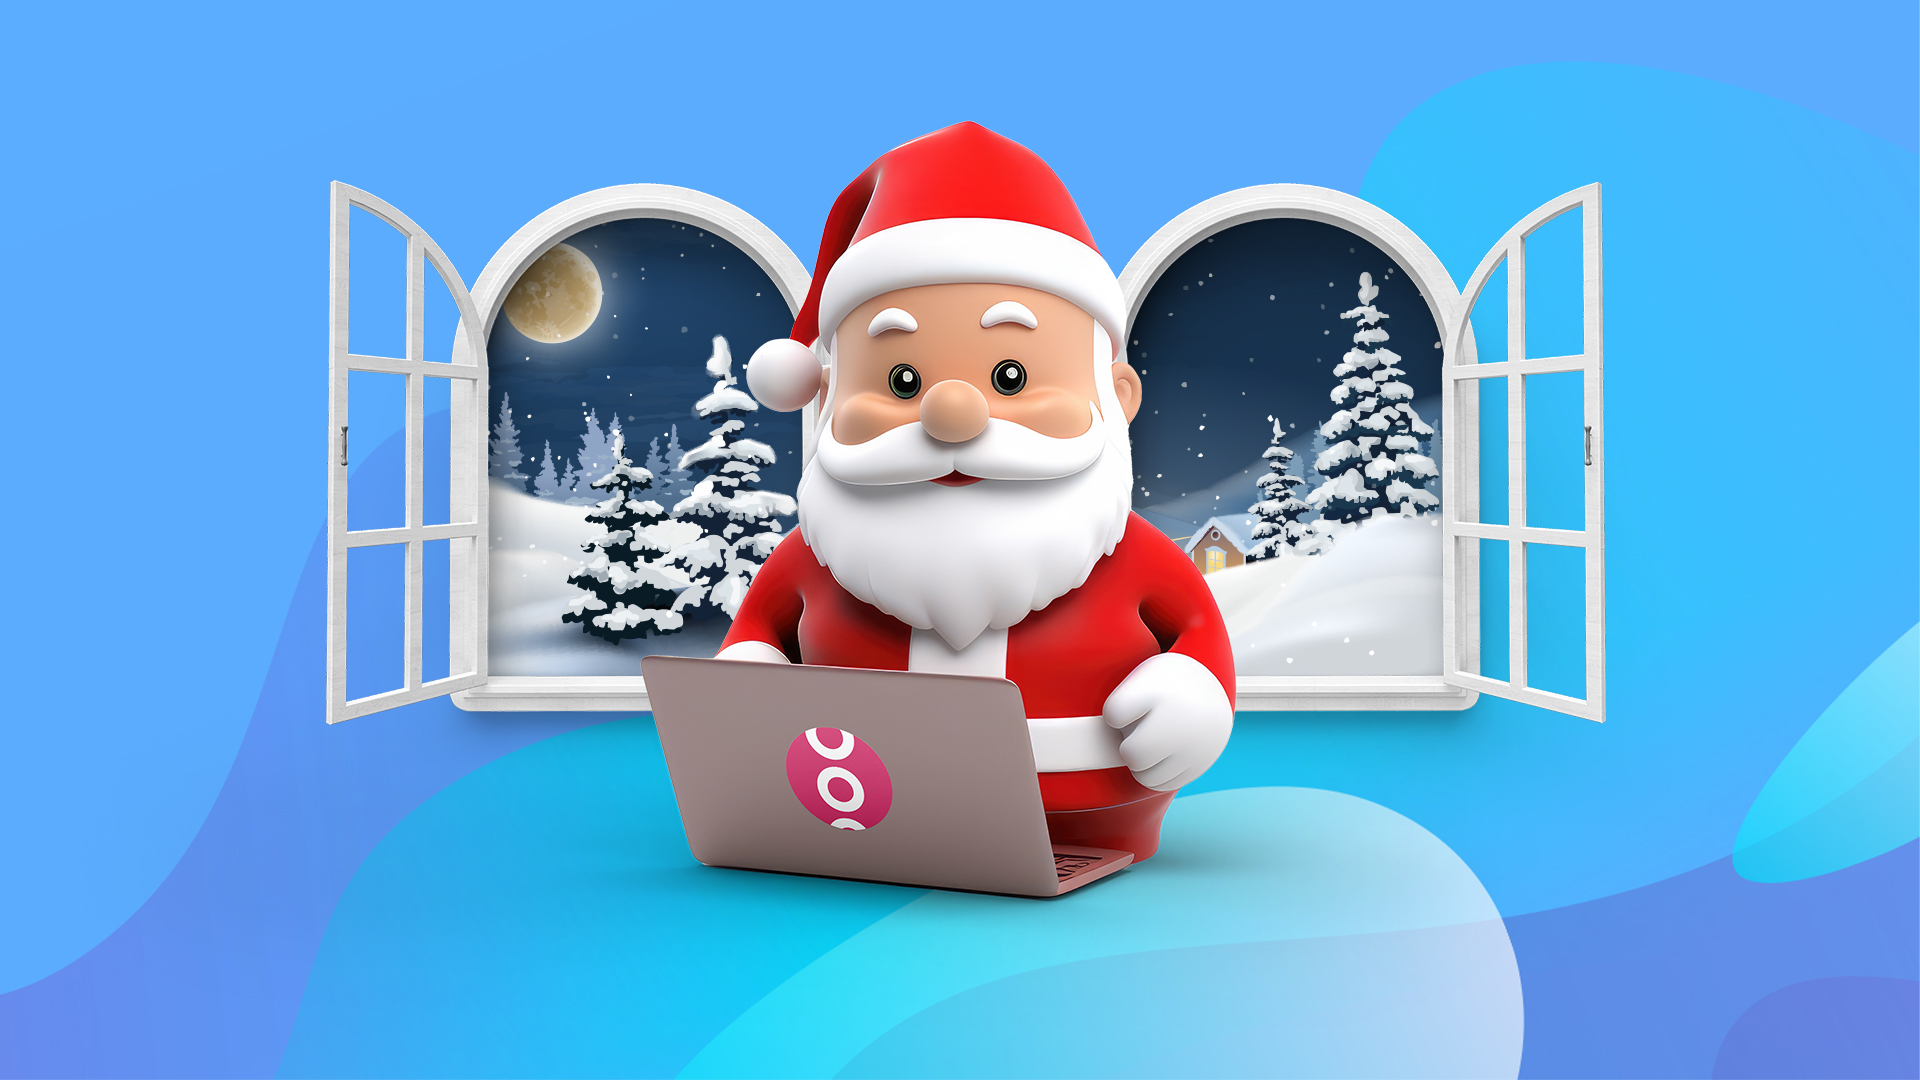 Animated Santa standing in front of windows, using a laptop with a SlotsLV logo, set against a blue background.